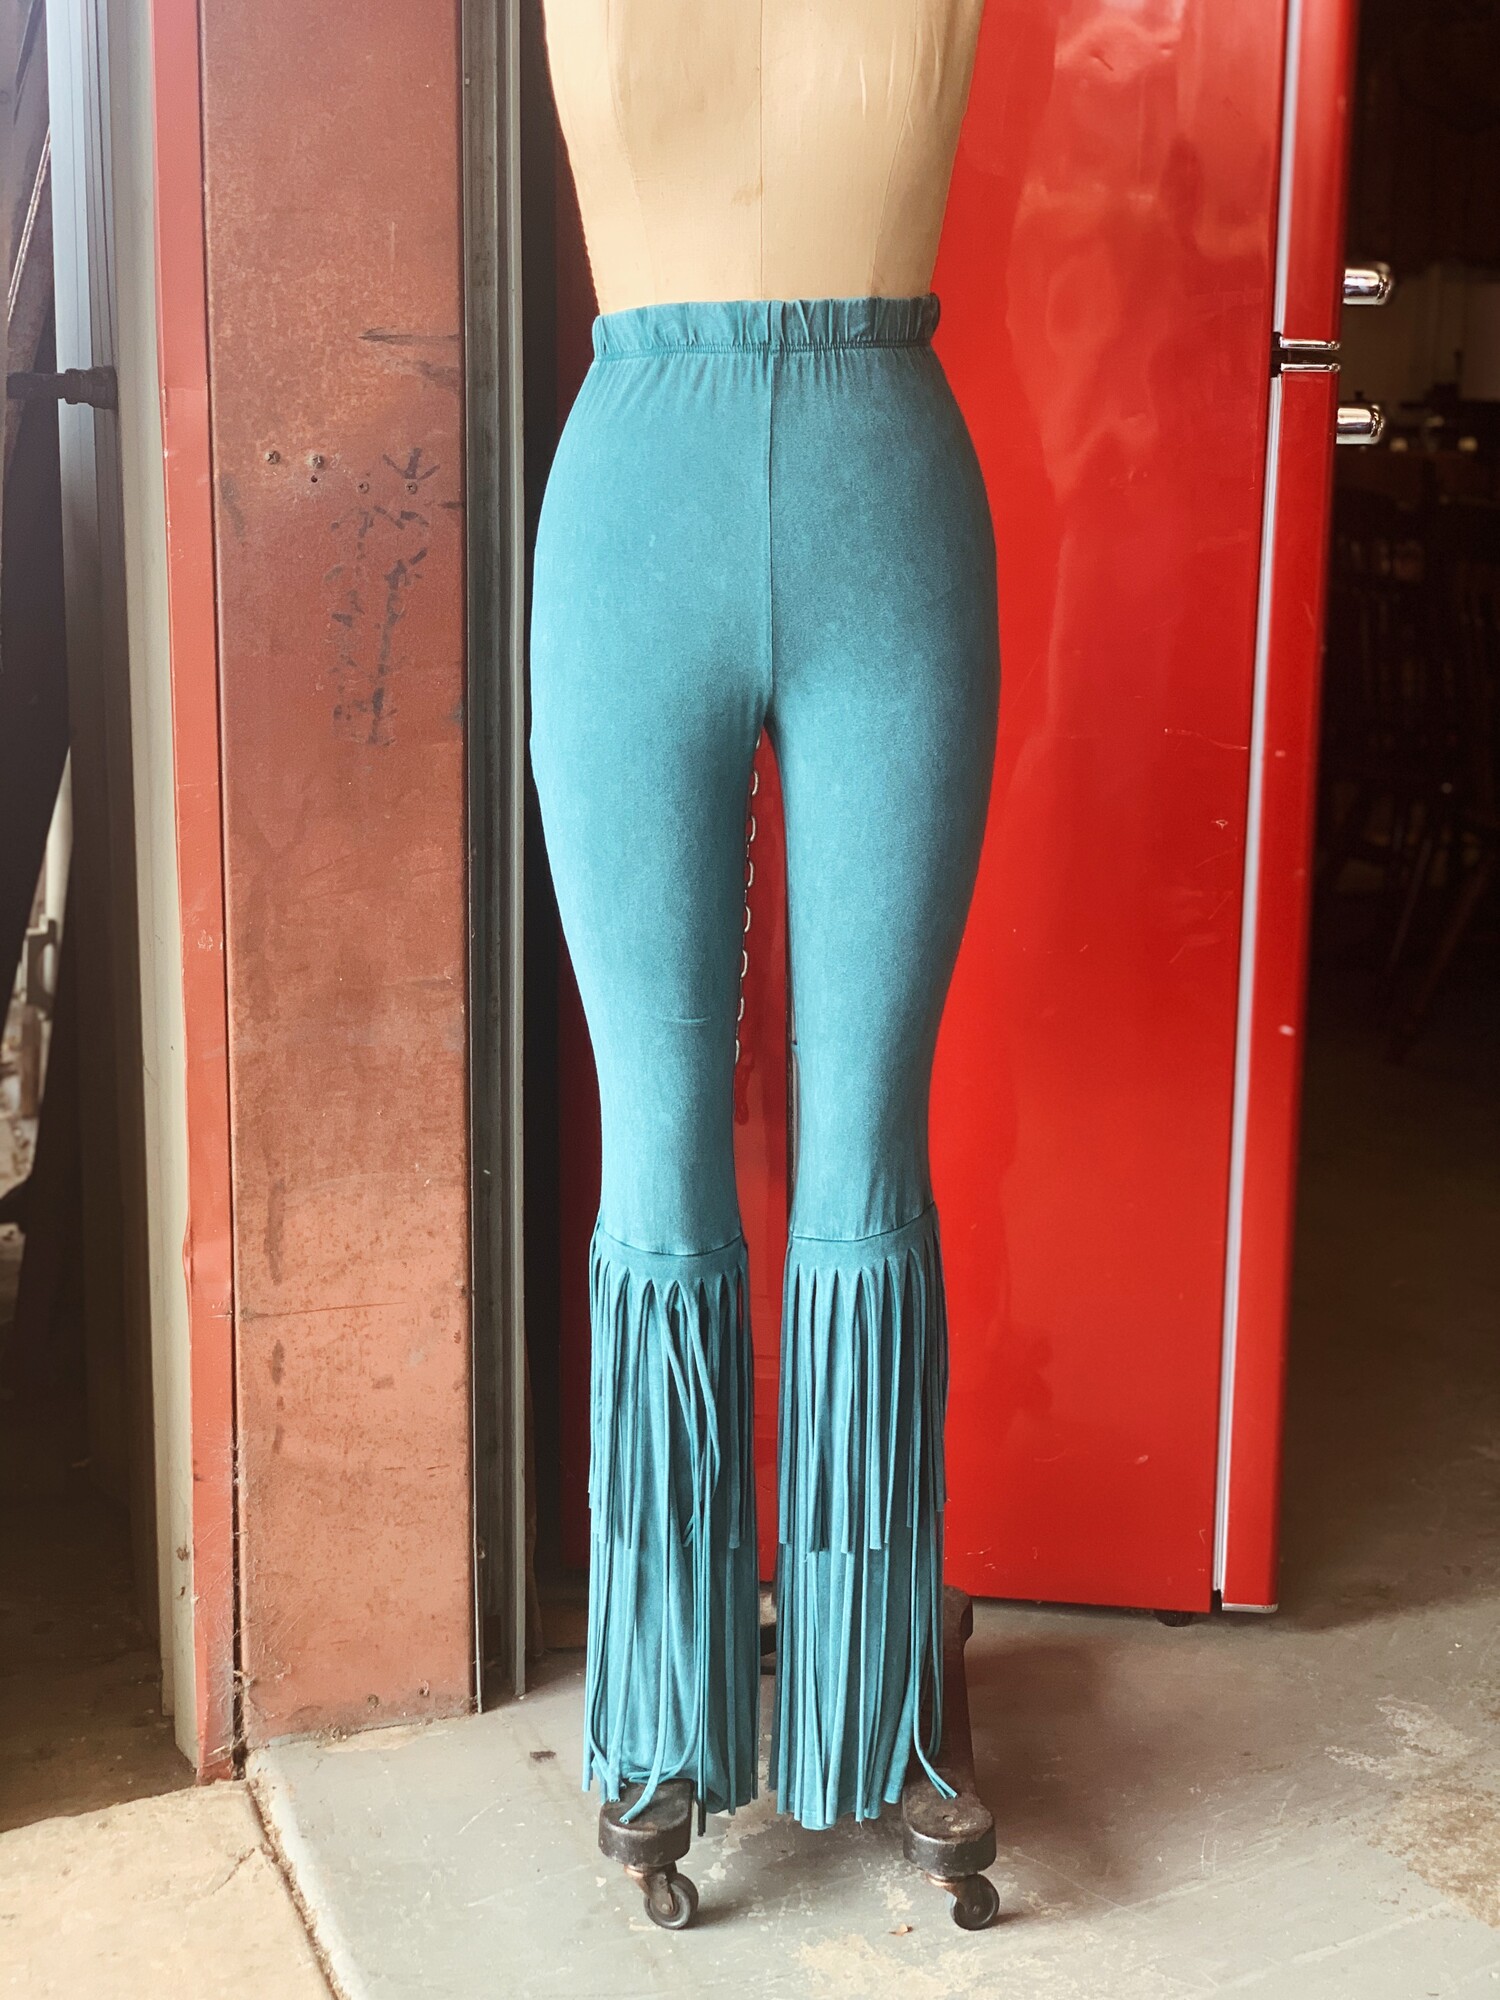 These pants are the most fun and instantly take any outfit to the next level!